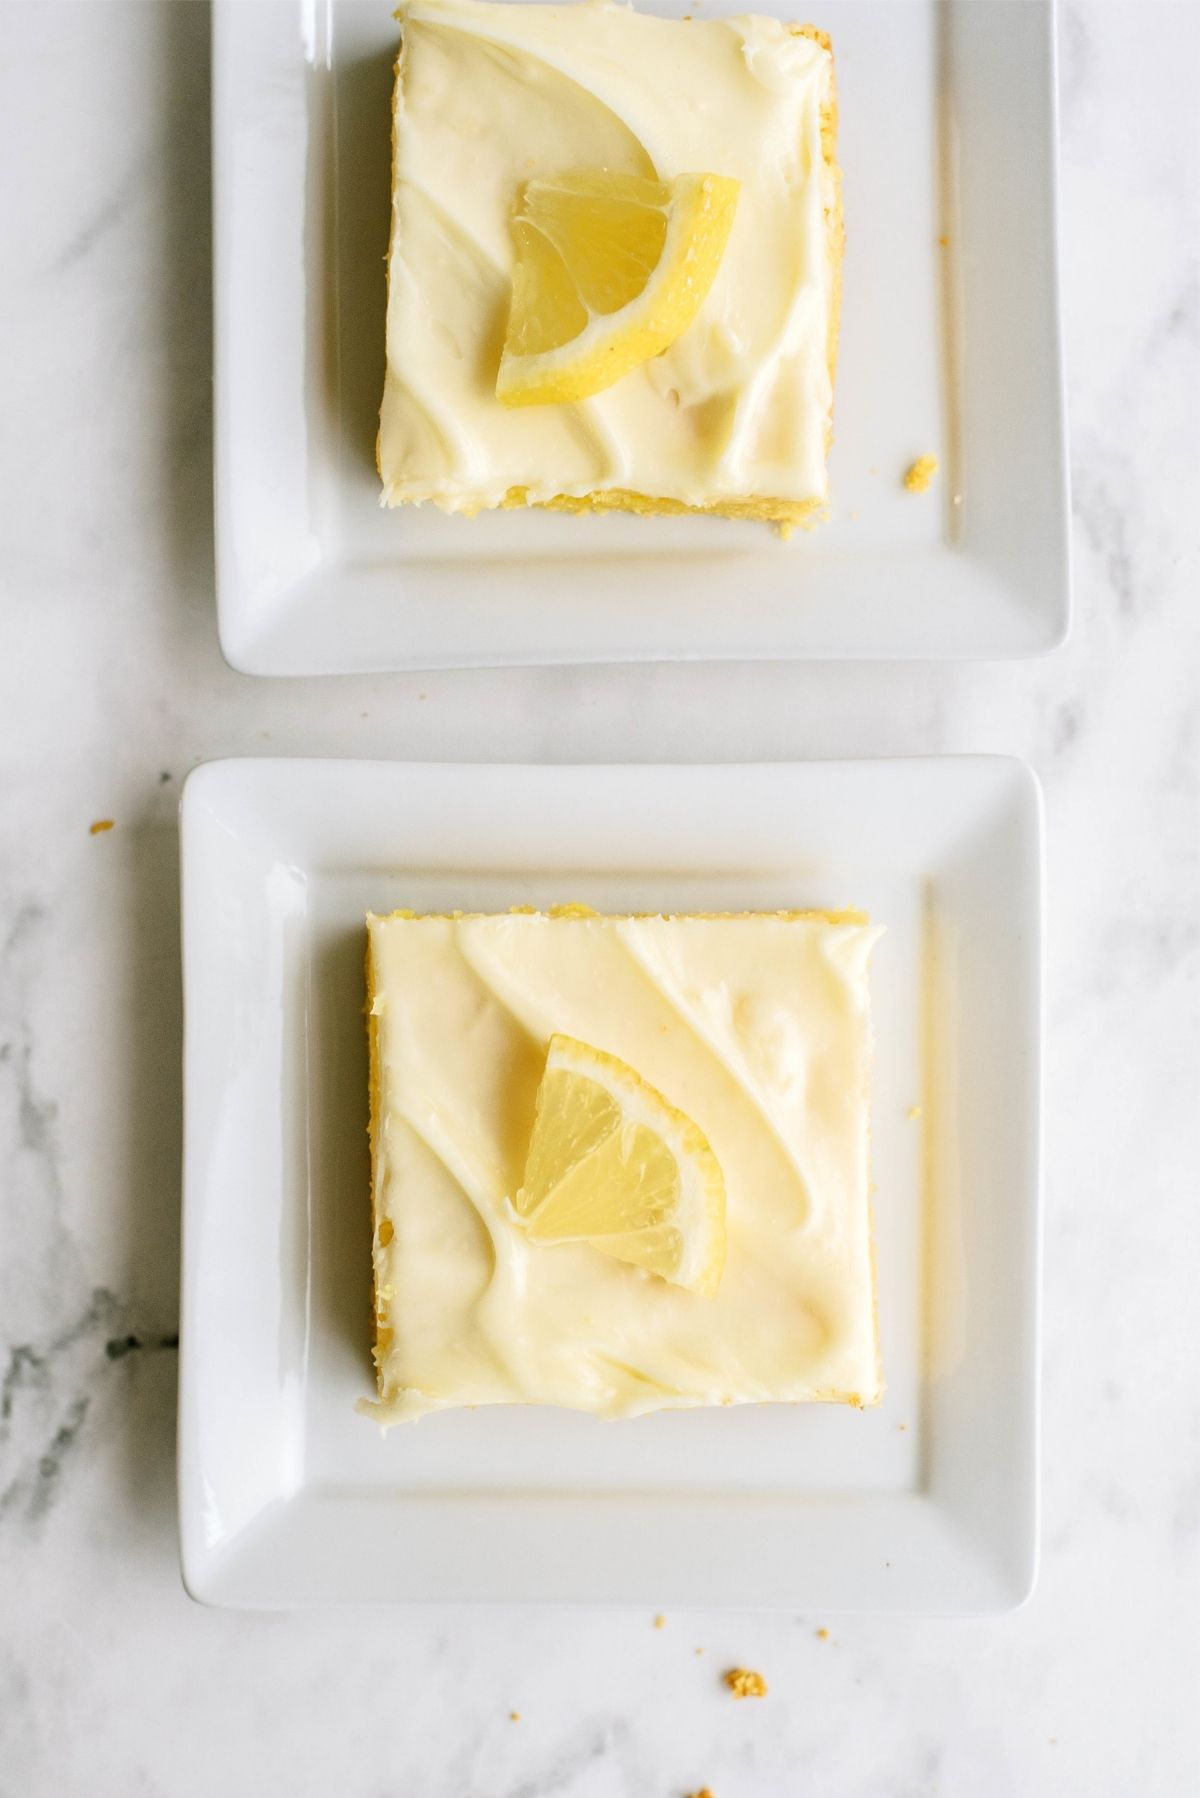 Two slices of Frosted Gooey Lemon Bars on plates